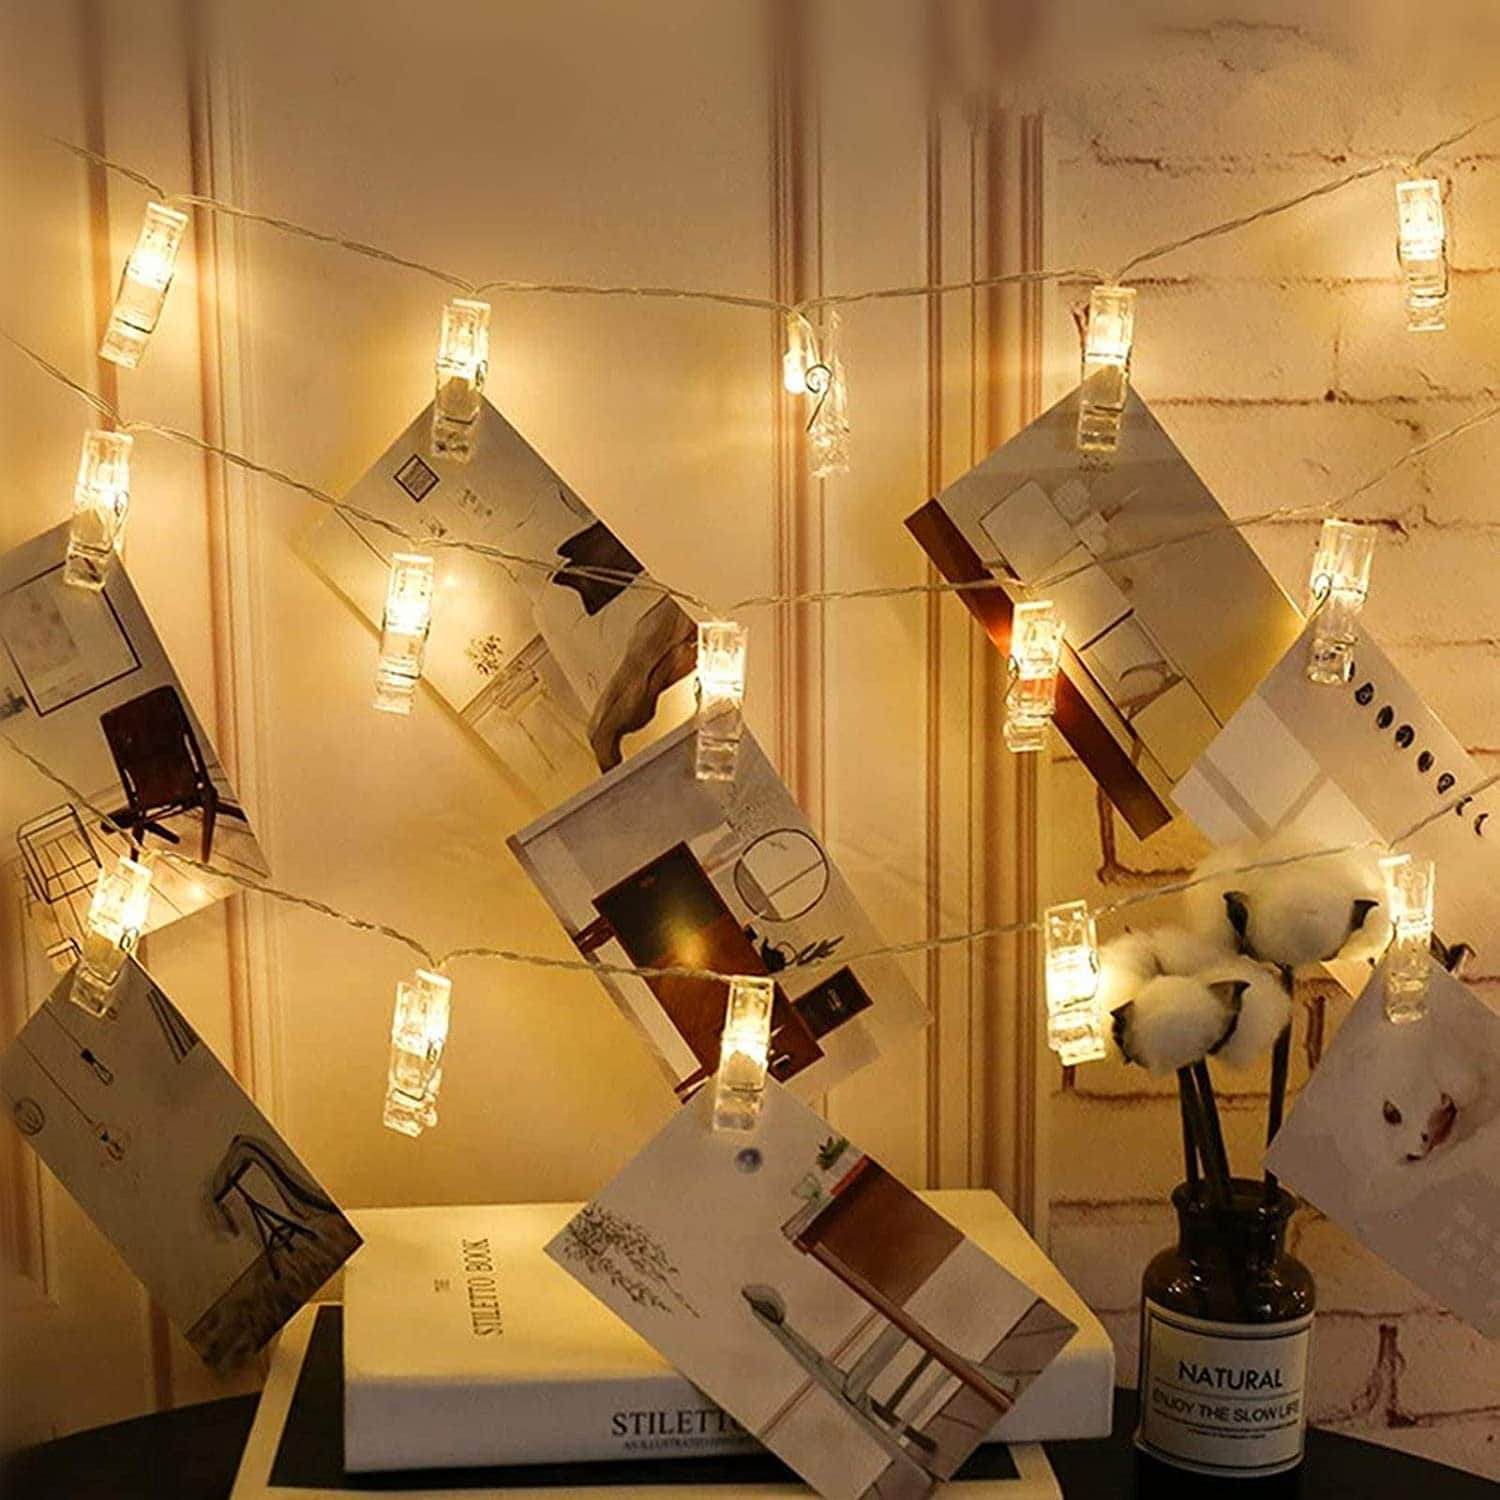 LED String Lights with Clips to Hang Pictures for Room Decor Lights String DH # 